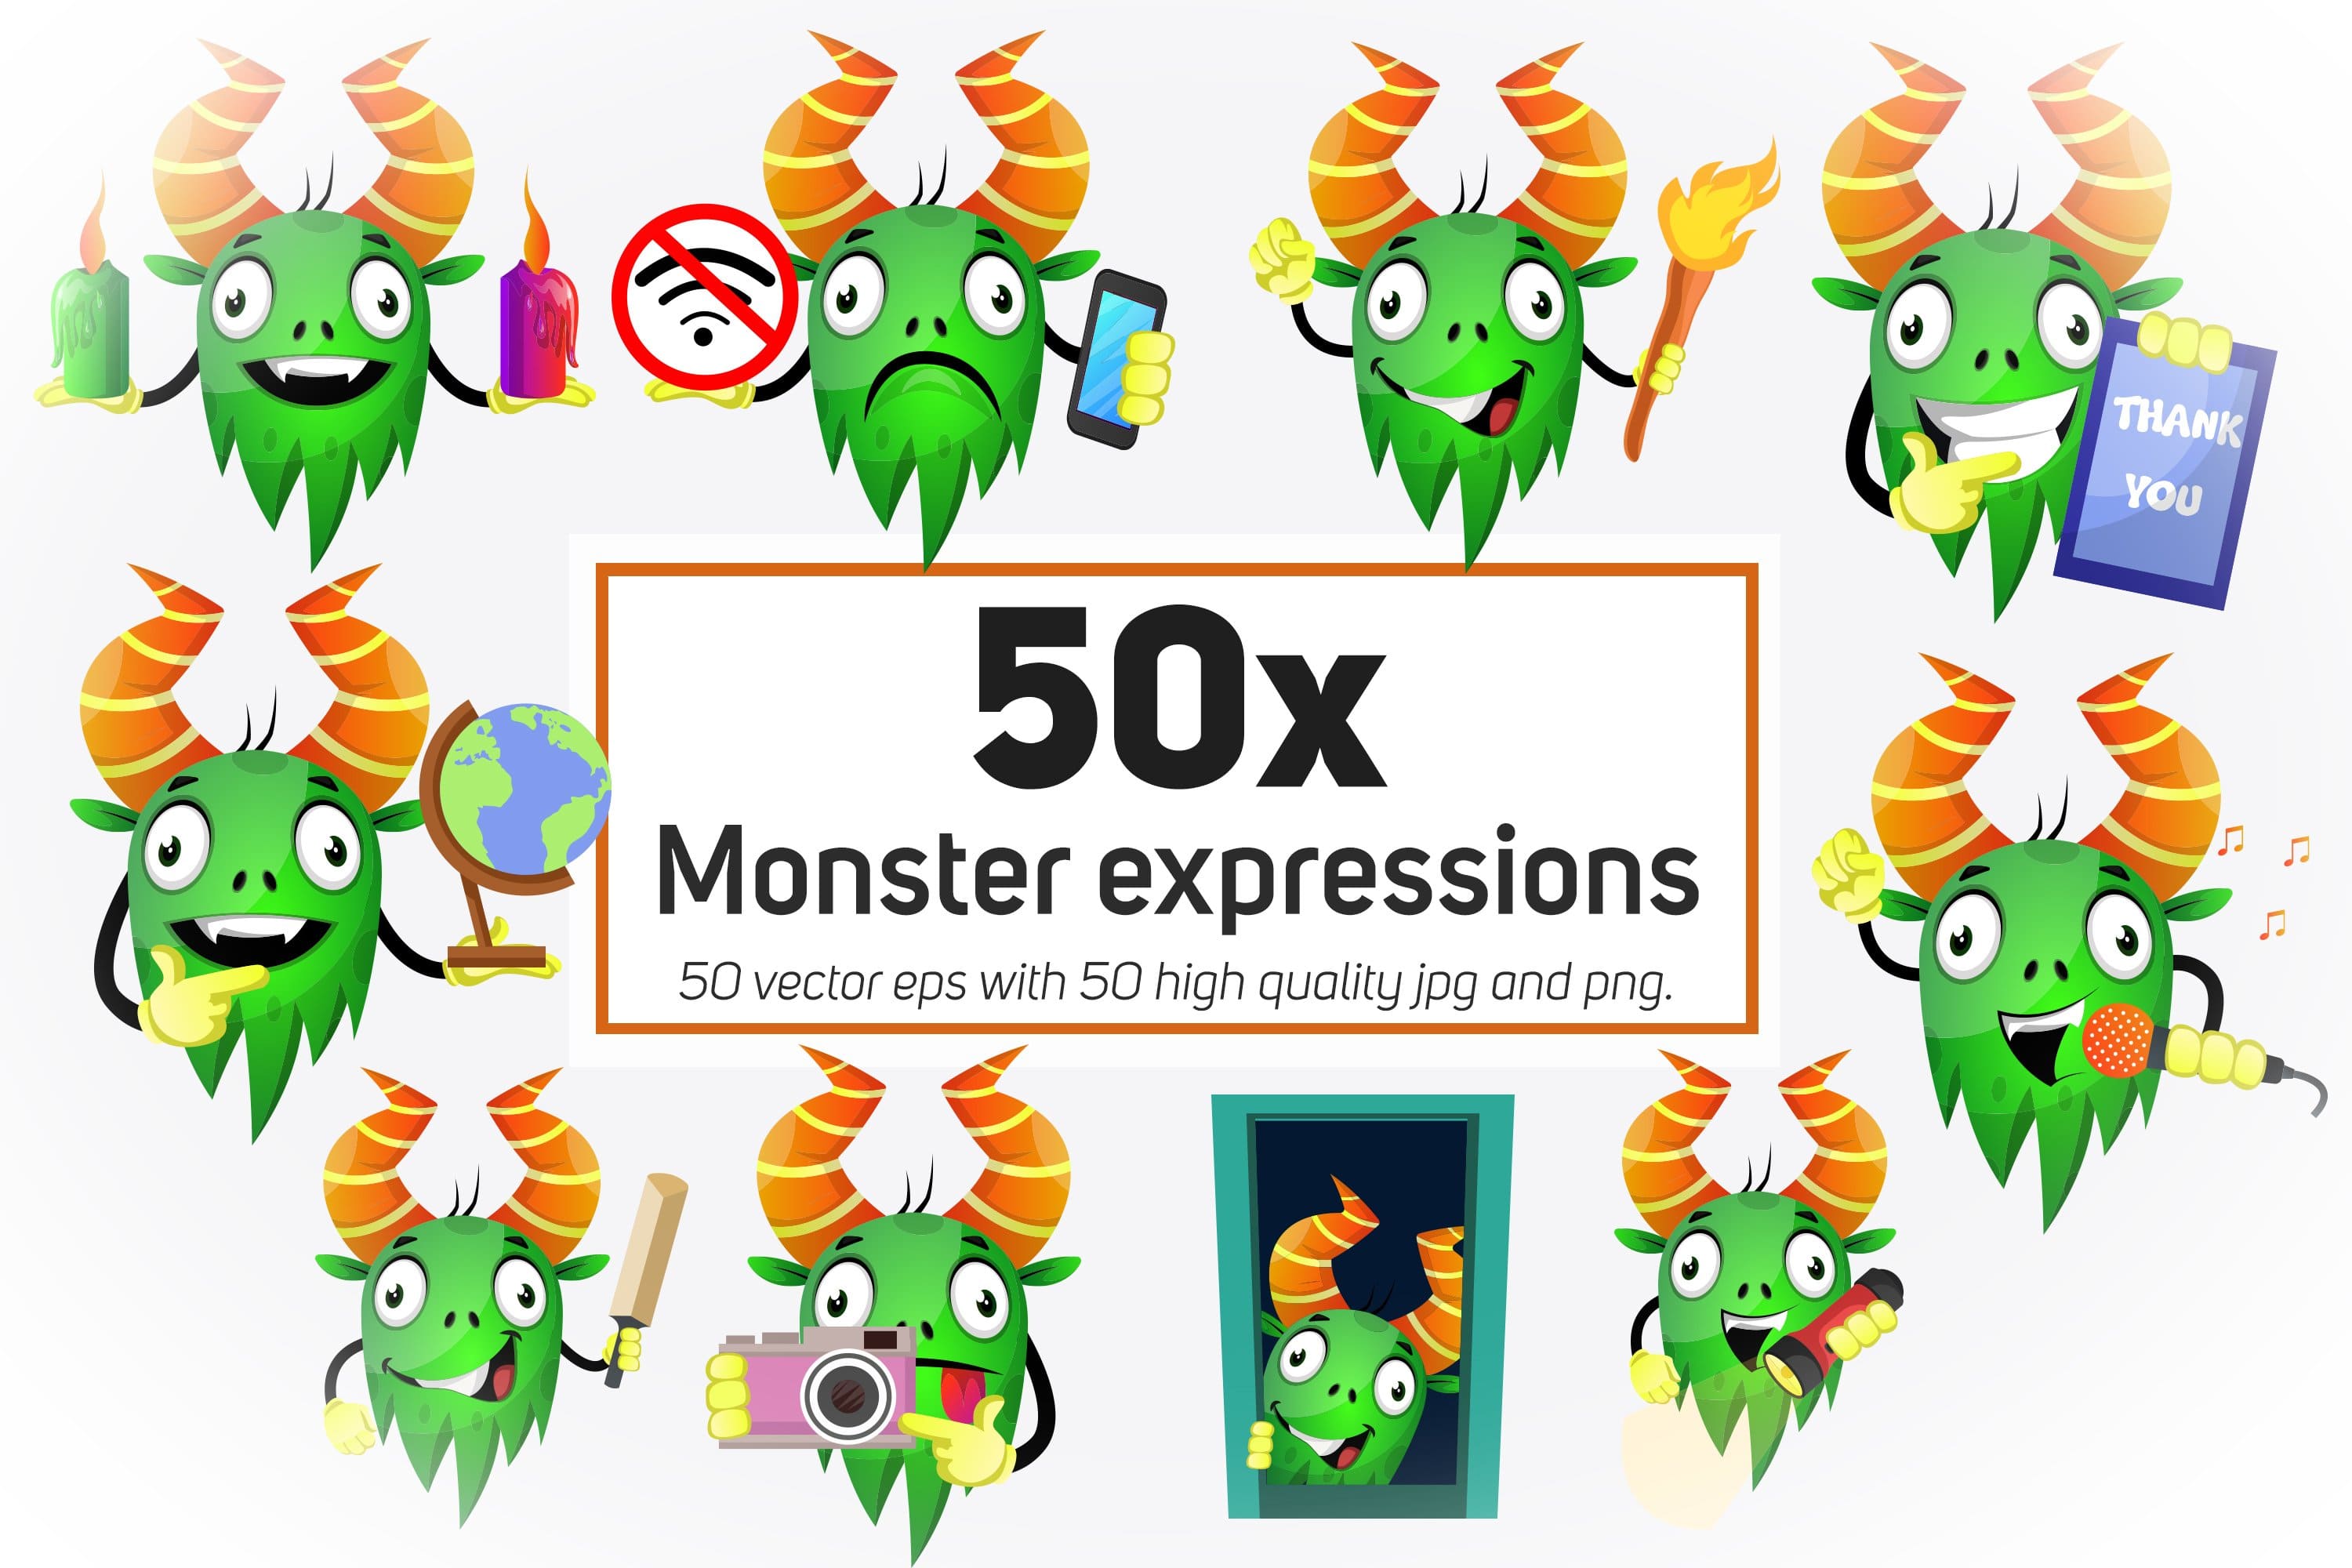 Awesome images with monster icons.